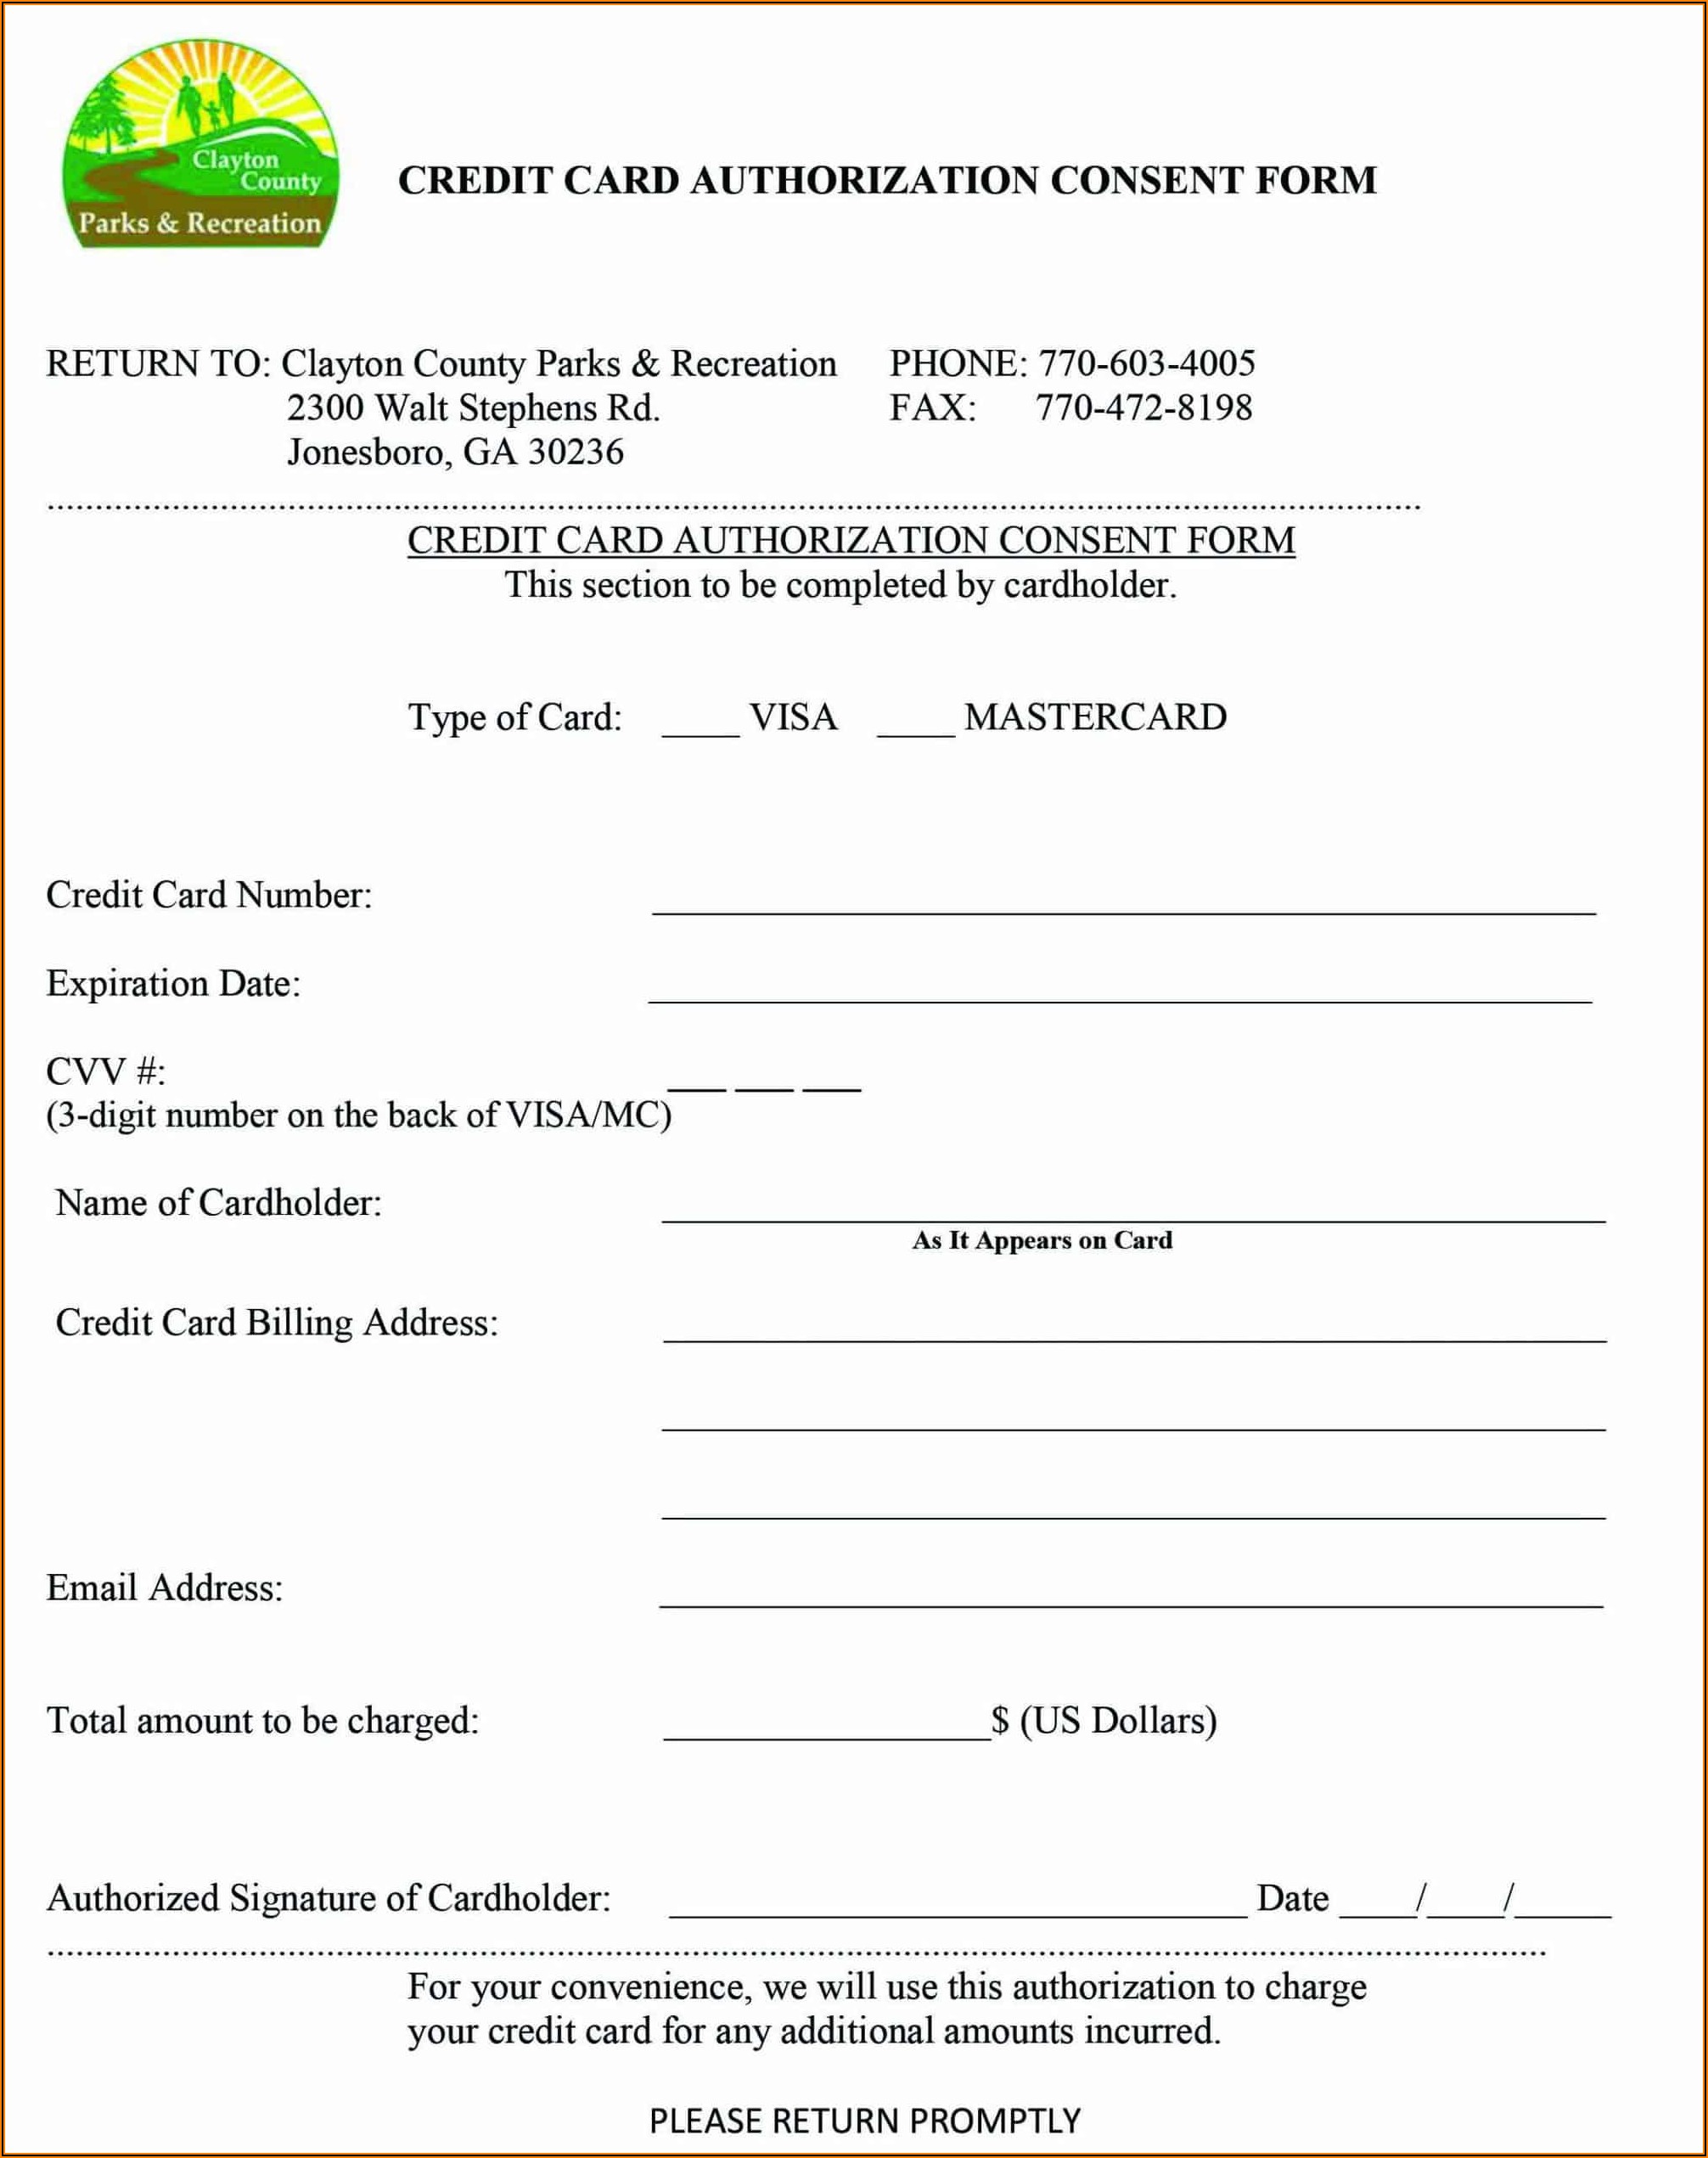 Clayton County Probate Court Forms